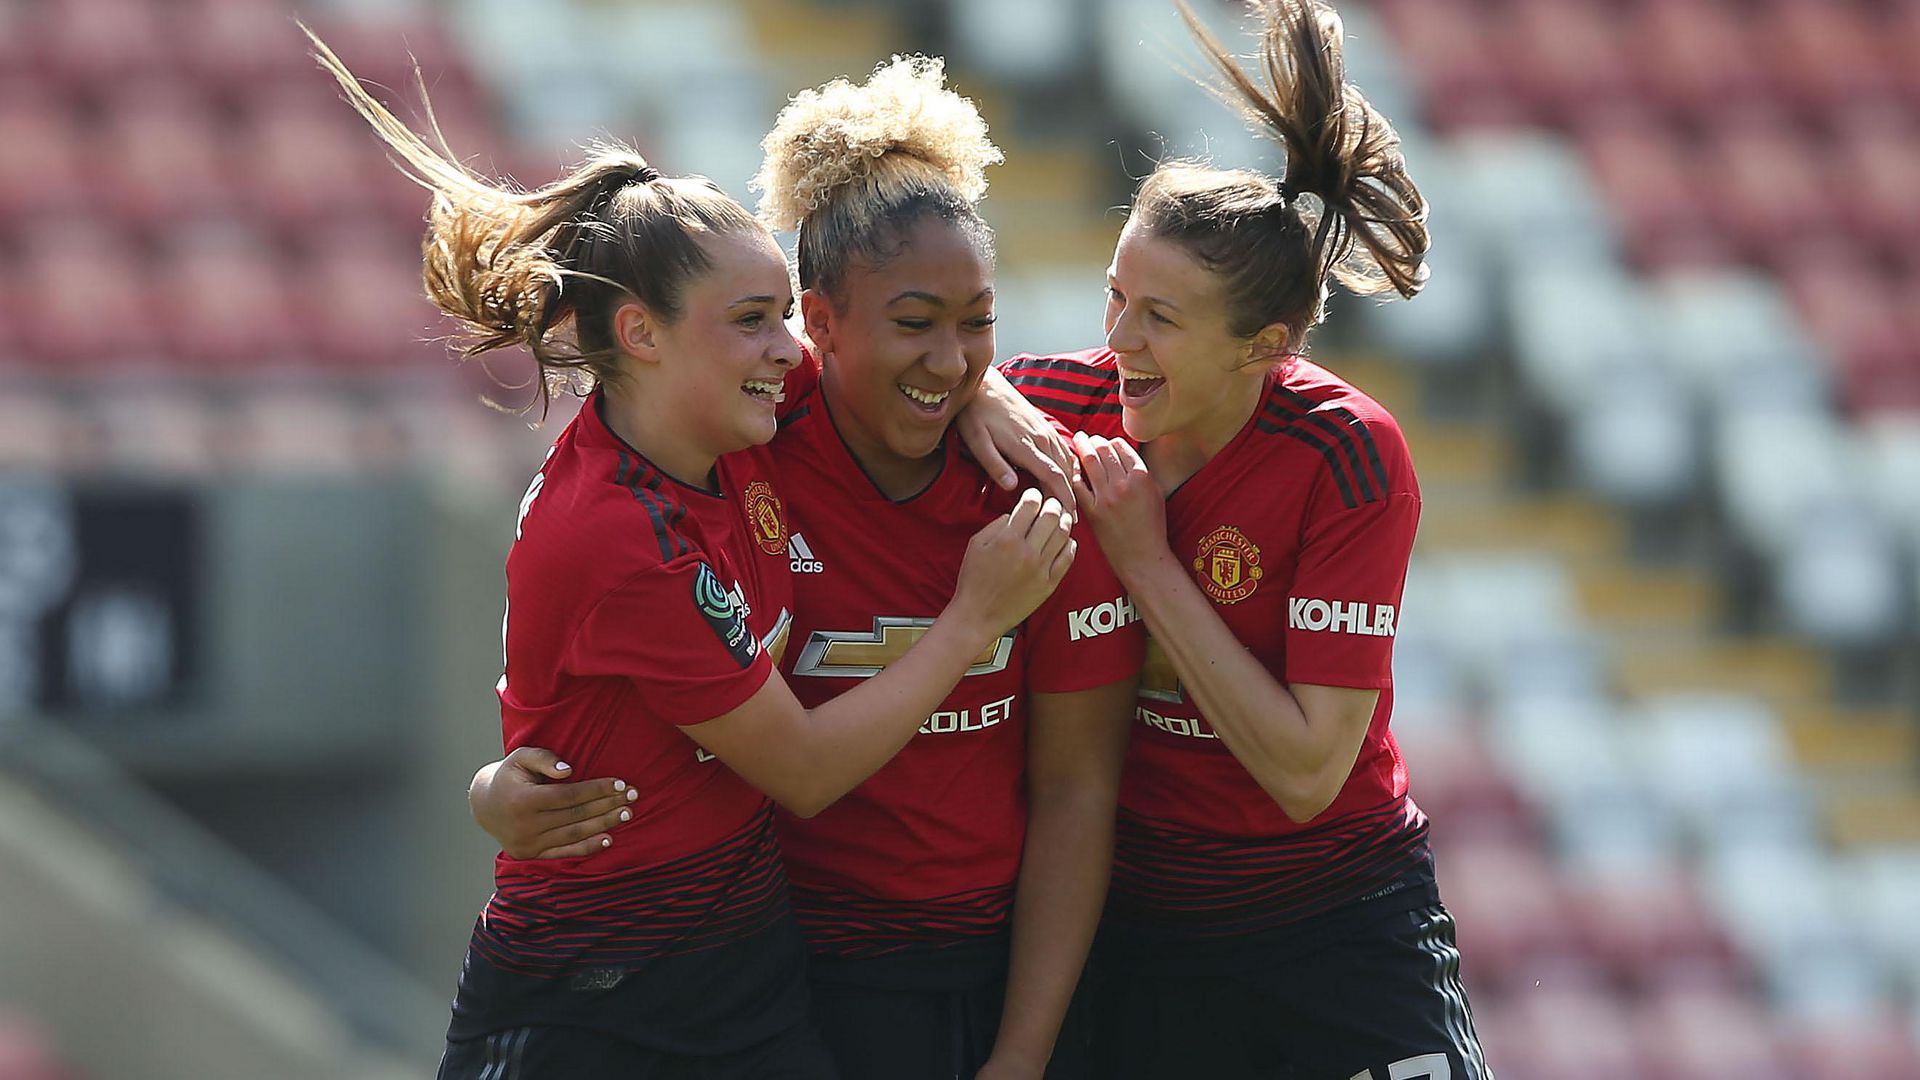 Match Preview For Manchester United Women V Lewes Women 11 May 2019 Manchester United